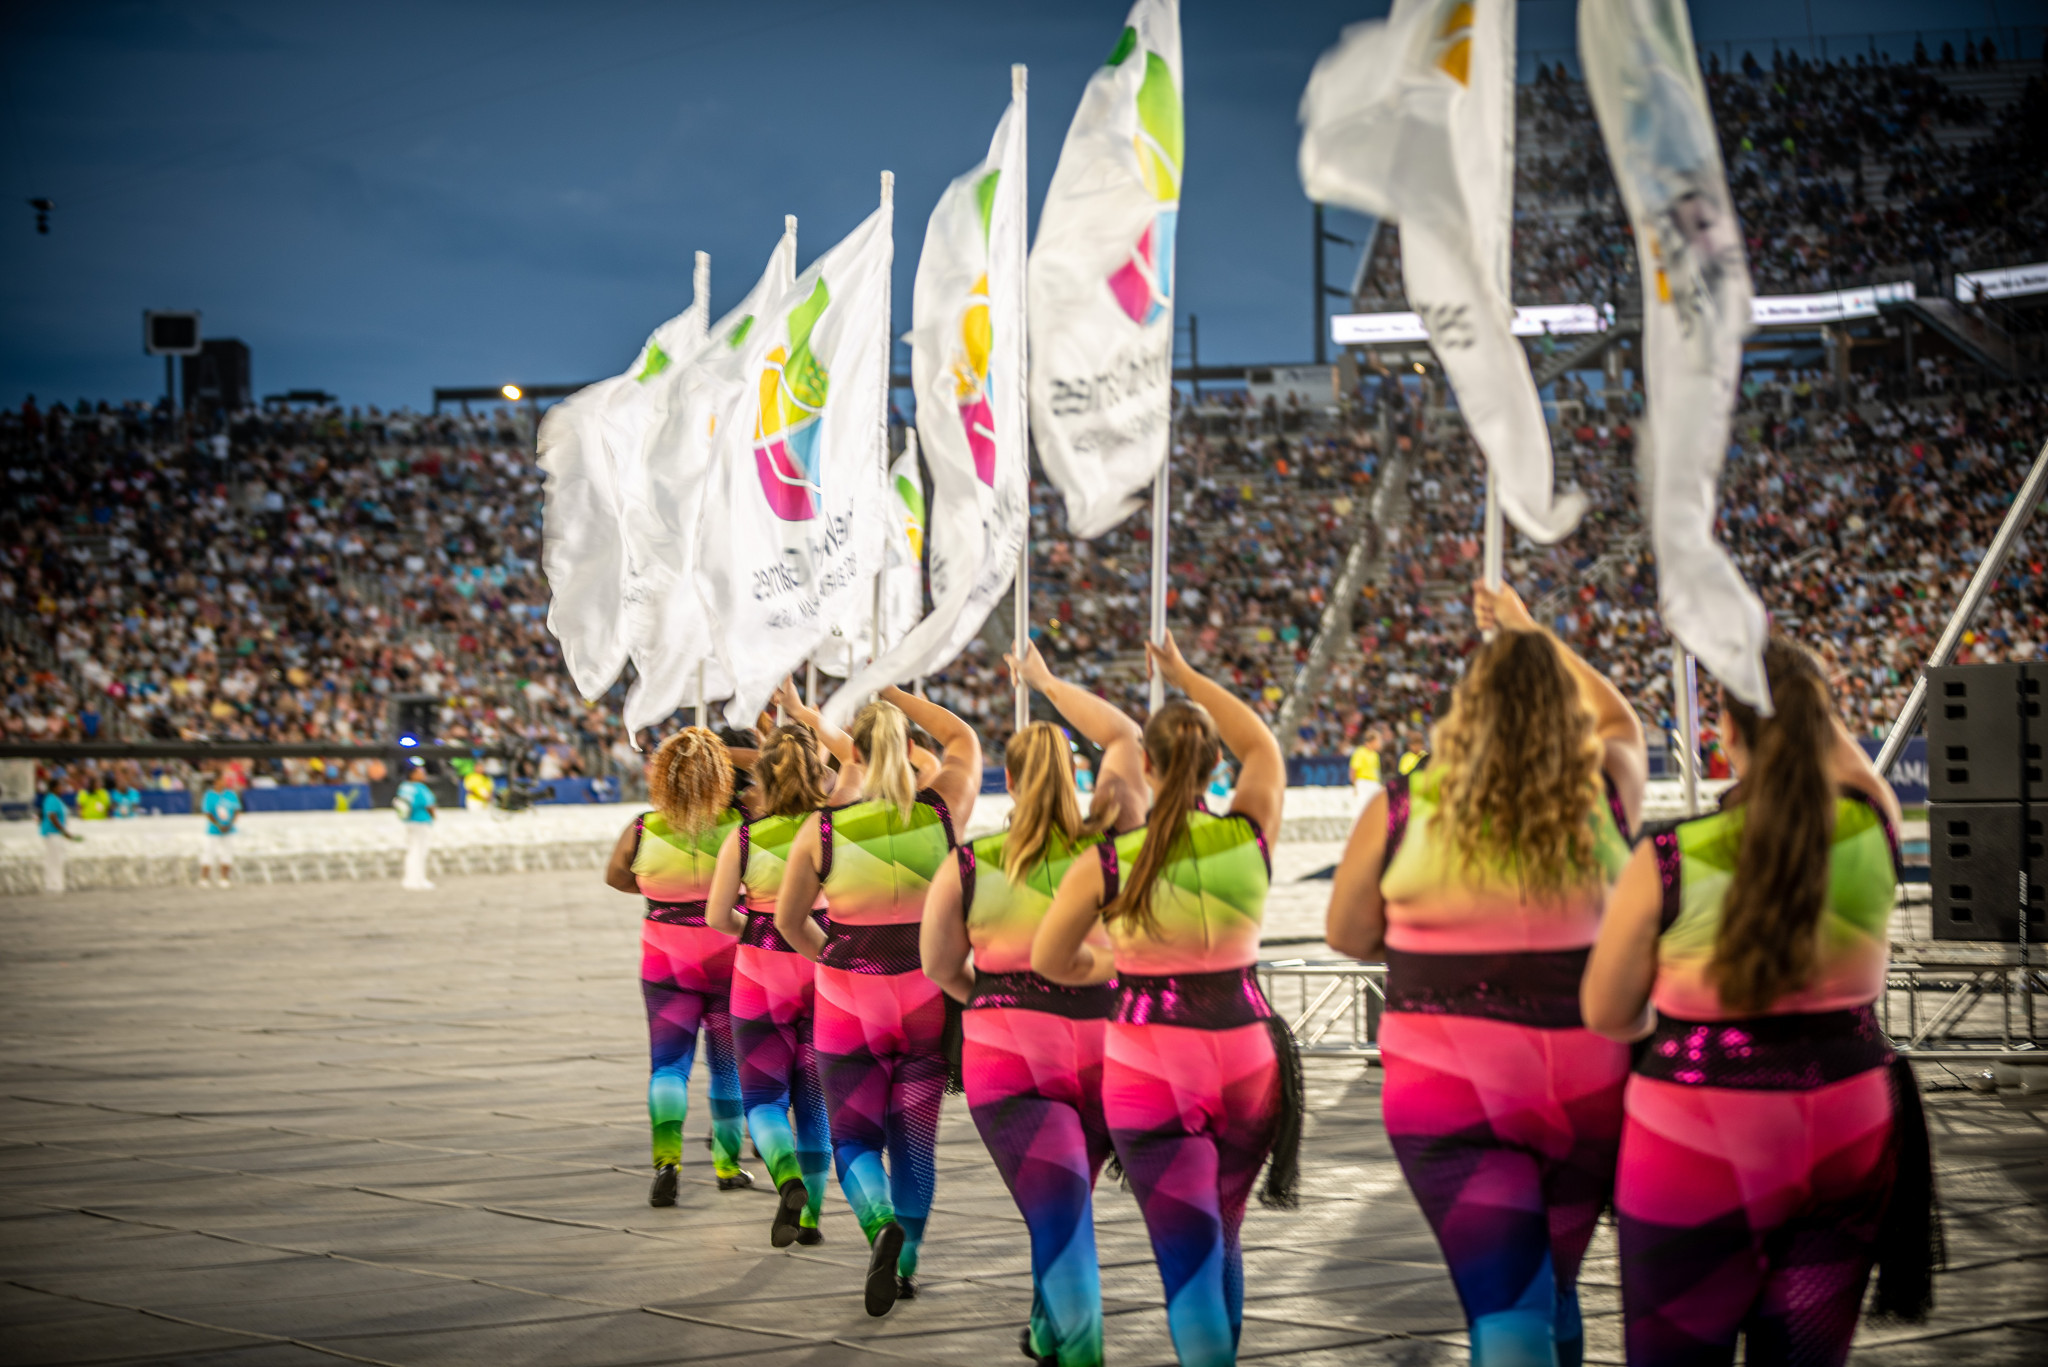 Transport officials respond to long delays at World Games Opening Ceremony